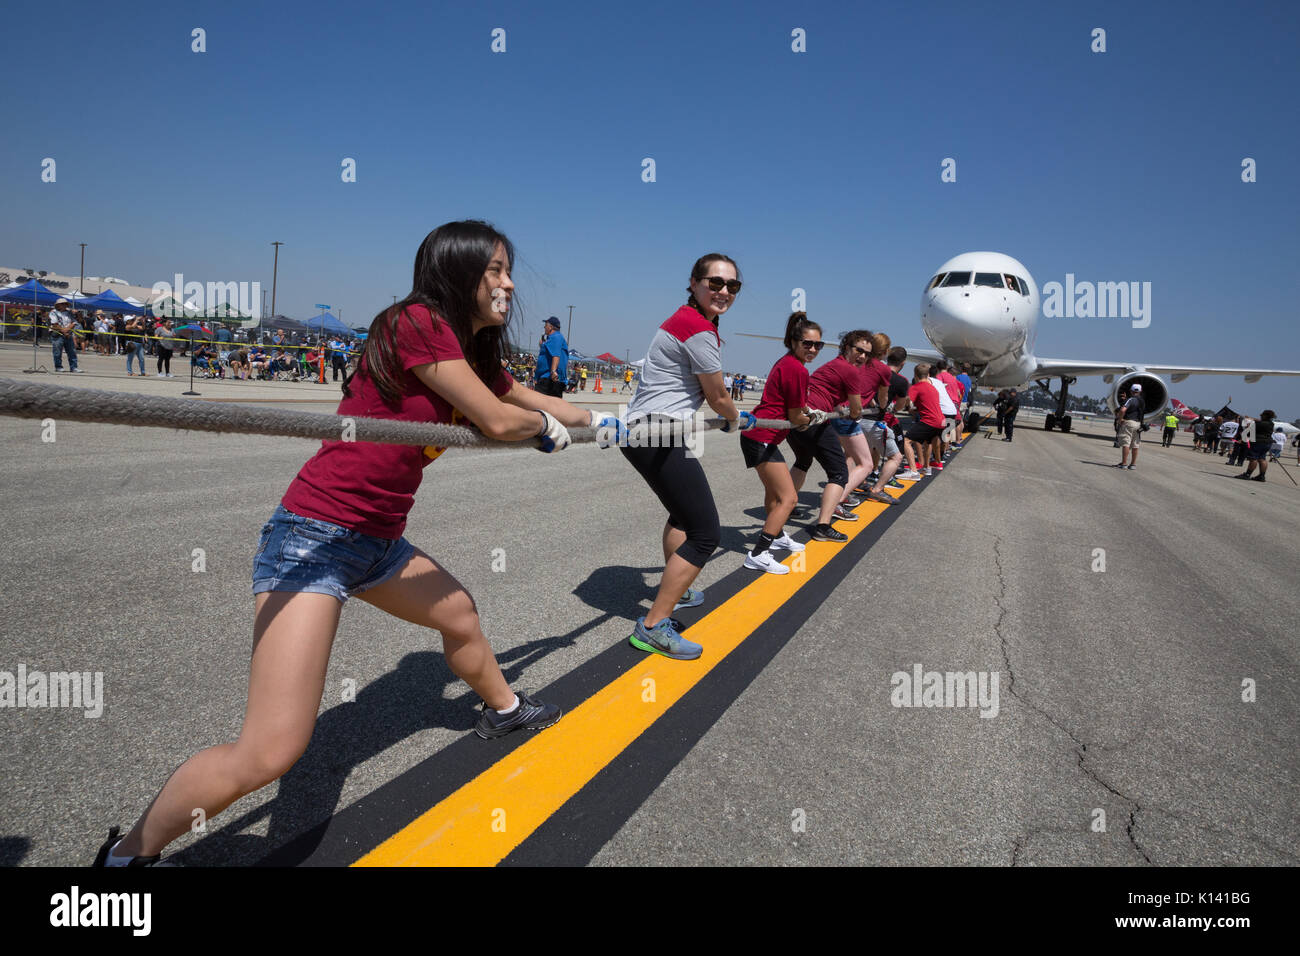 19 agosto 2017 - La University of Southern California Team compete in Special Olympics Southern California piano tirare a Long Beach Airport Foto Stock